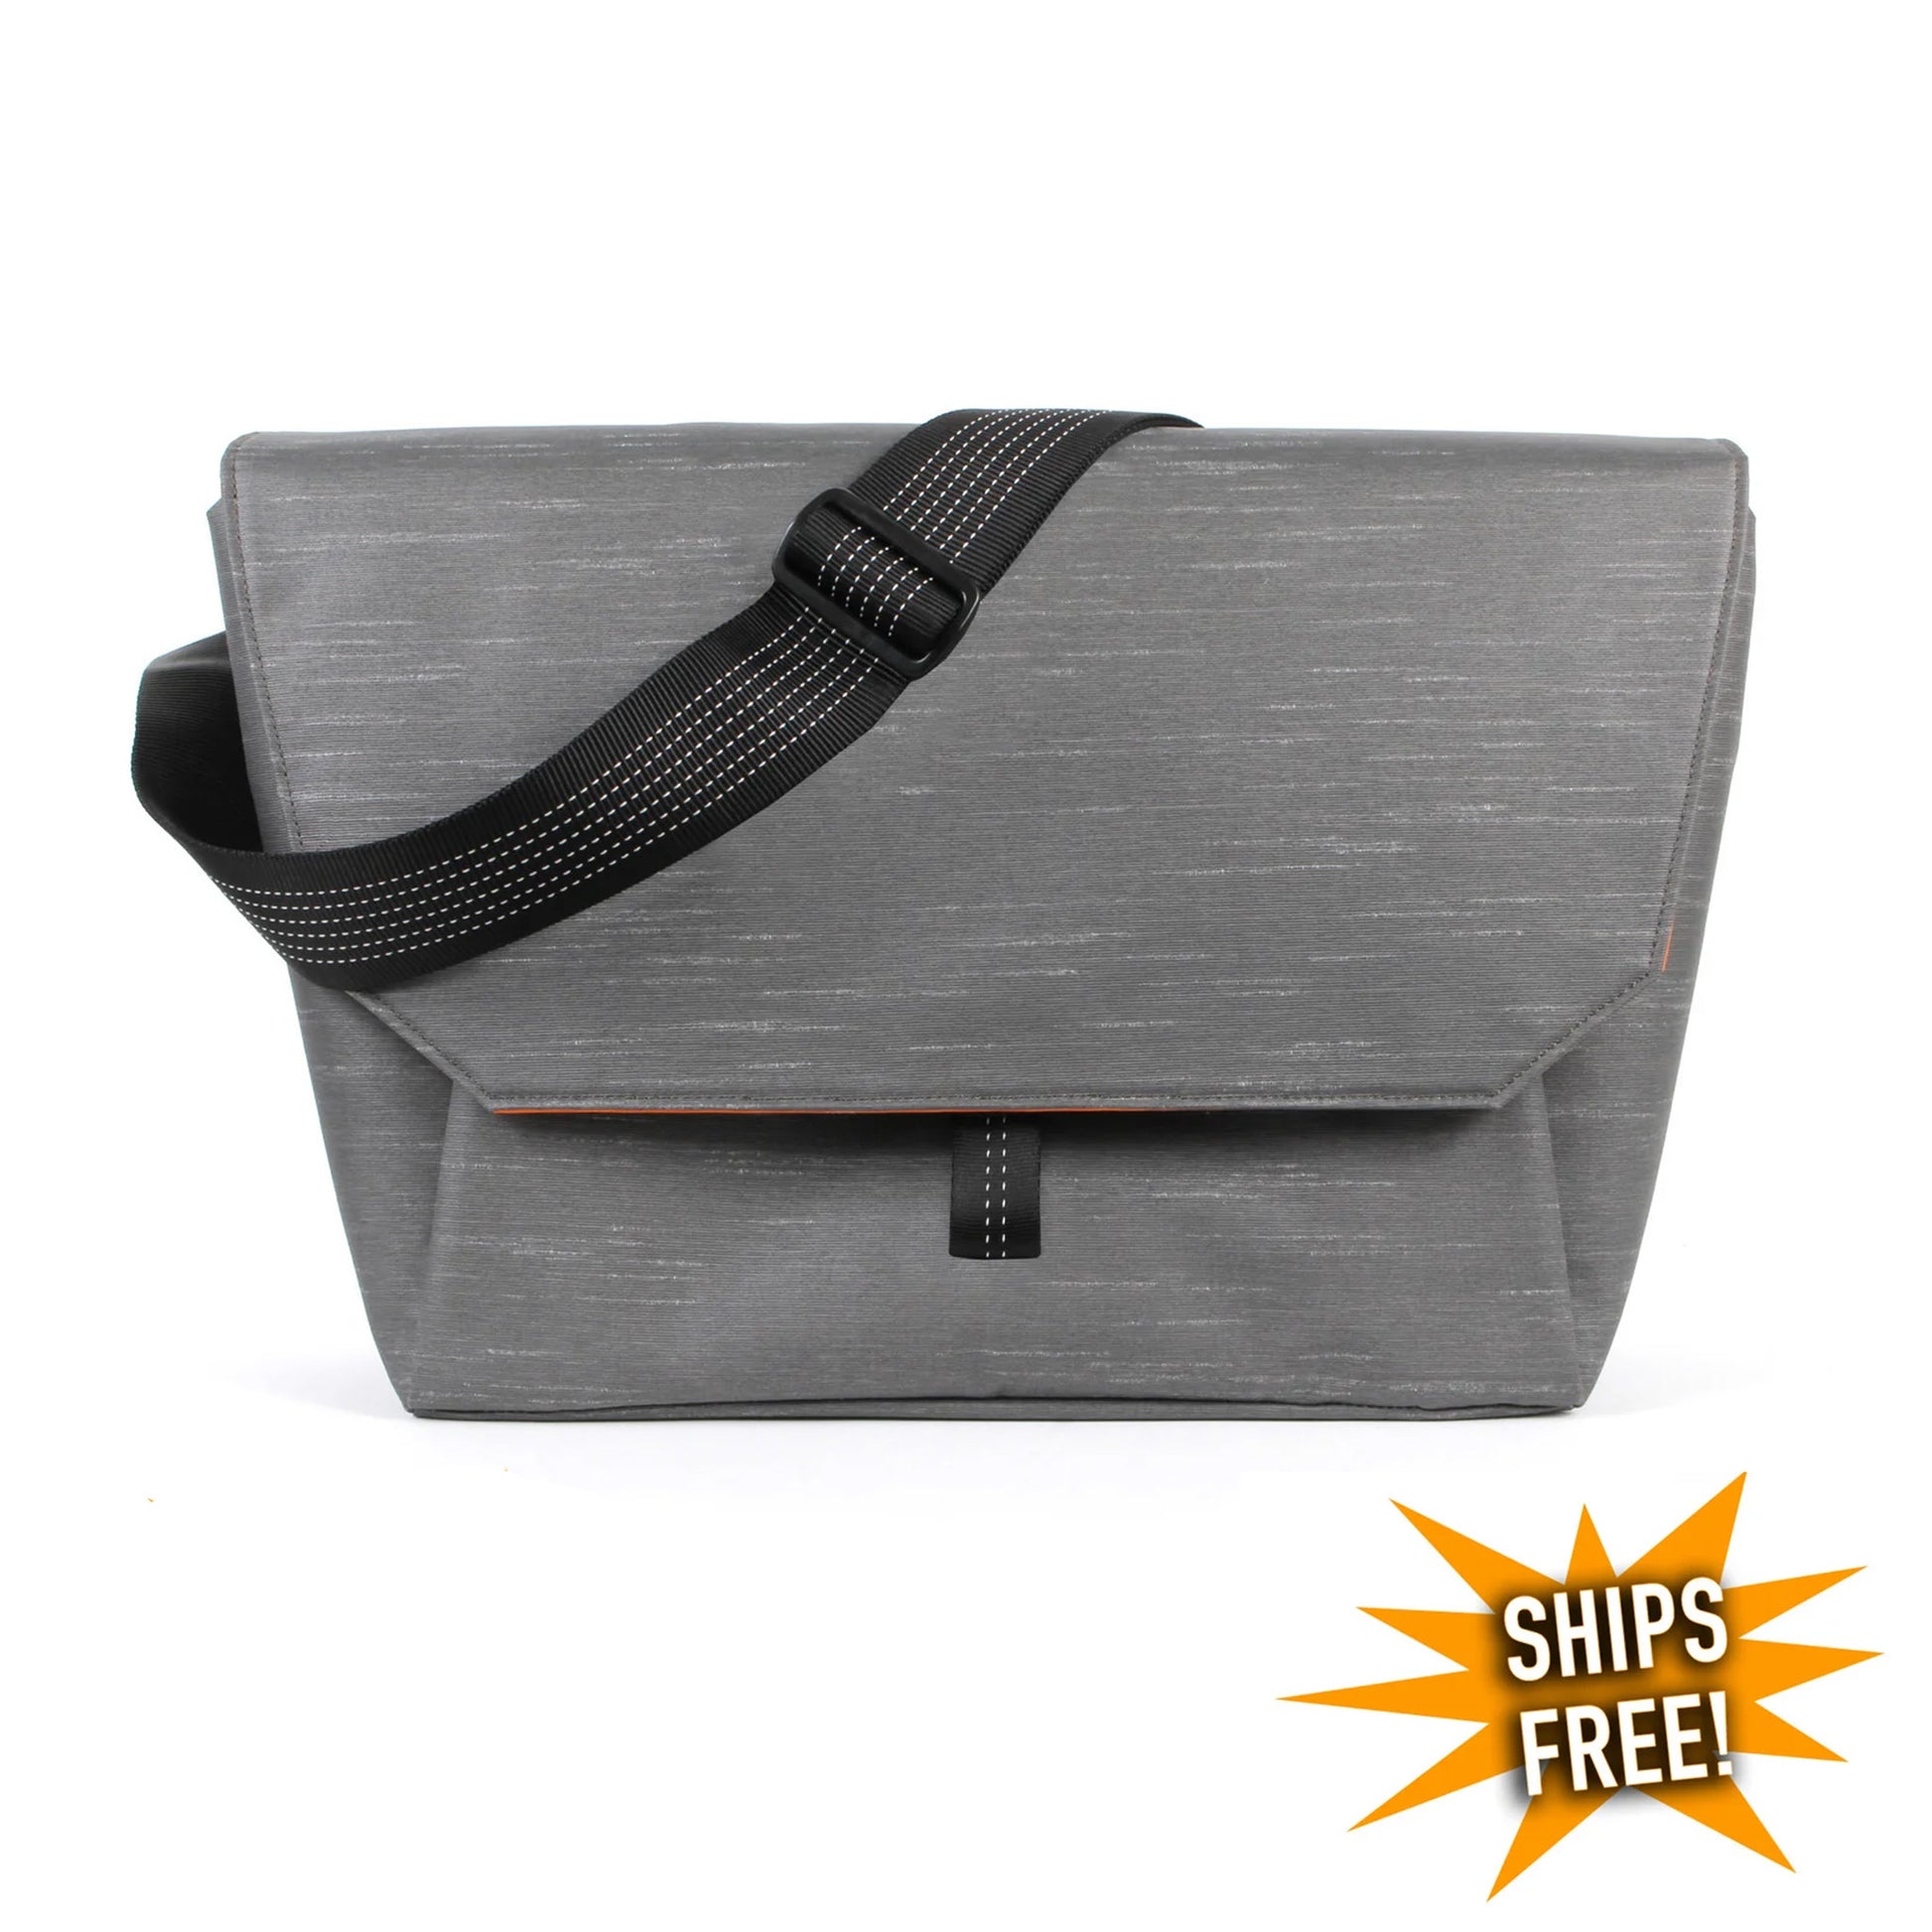 NEW Field One Marker Bag Expansion Flap